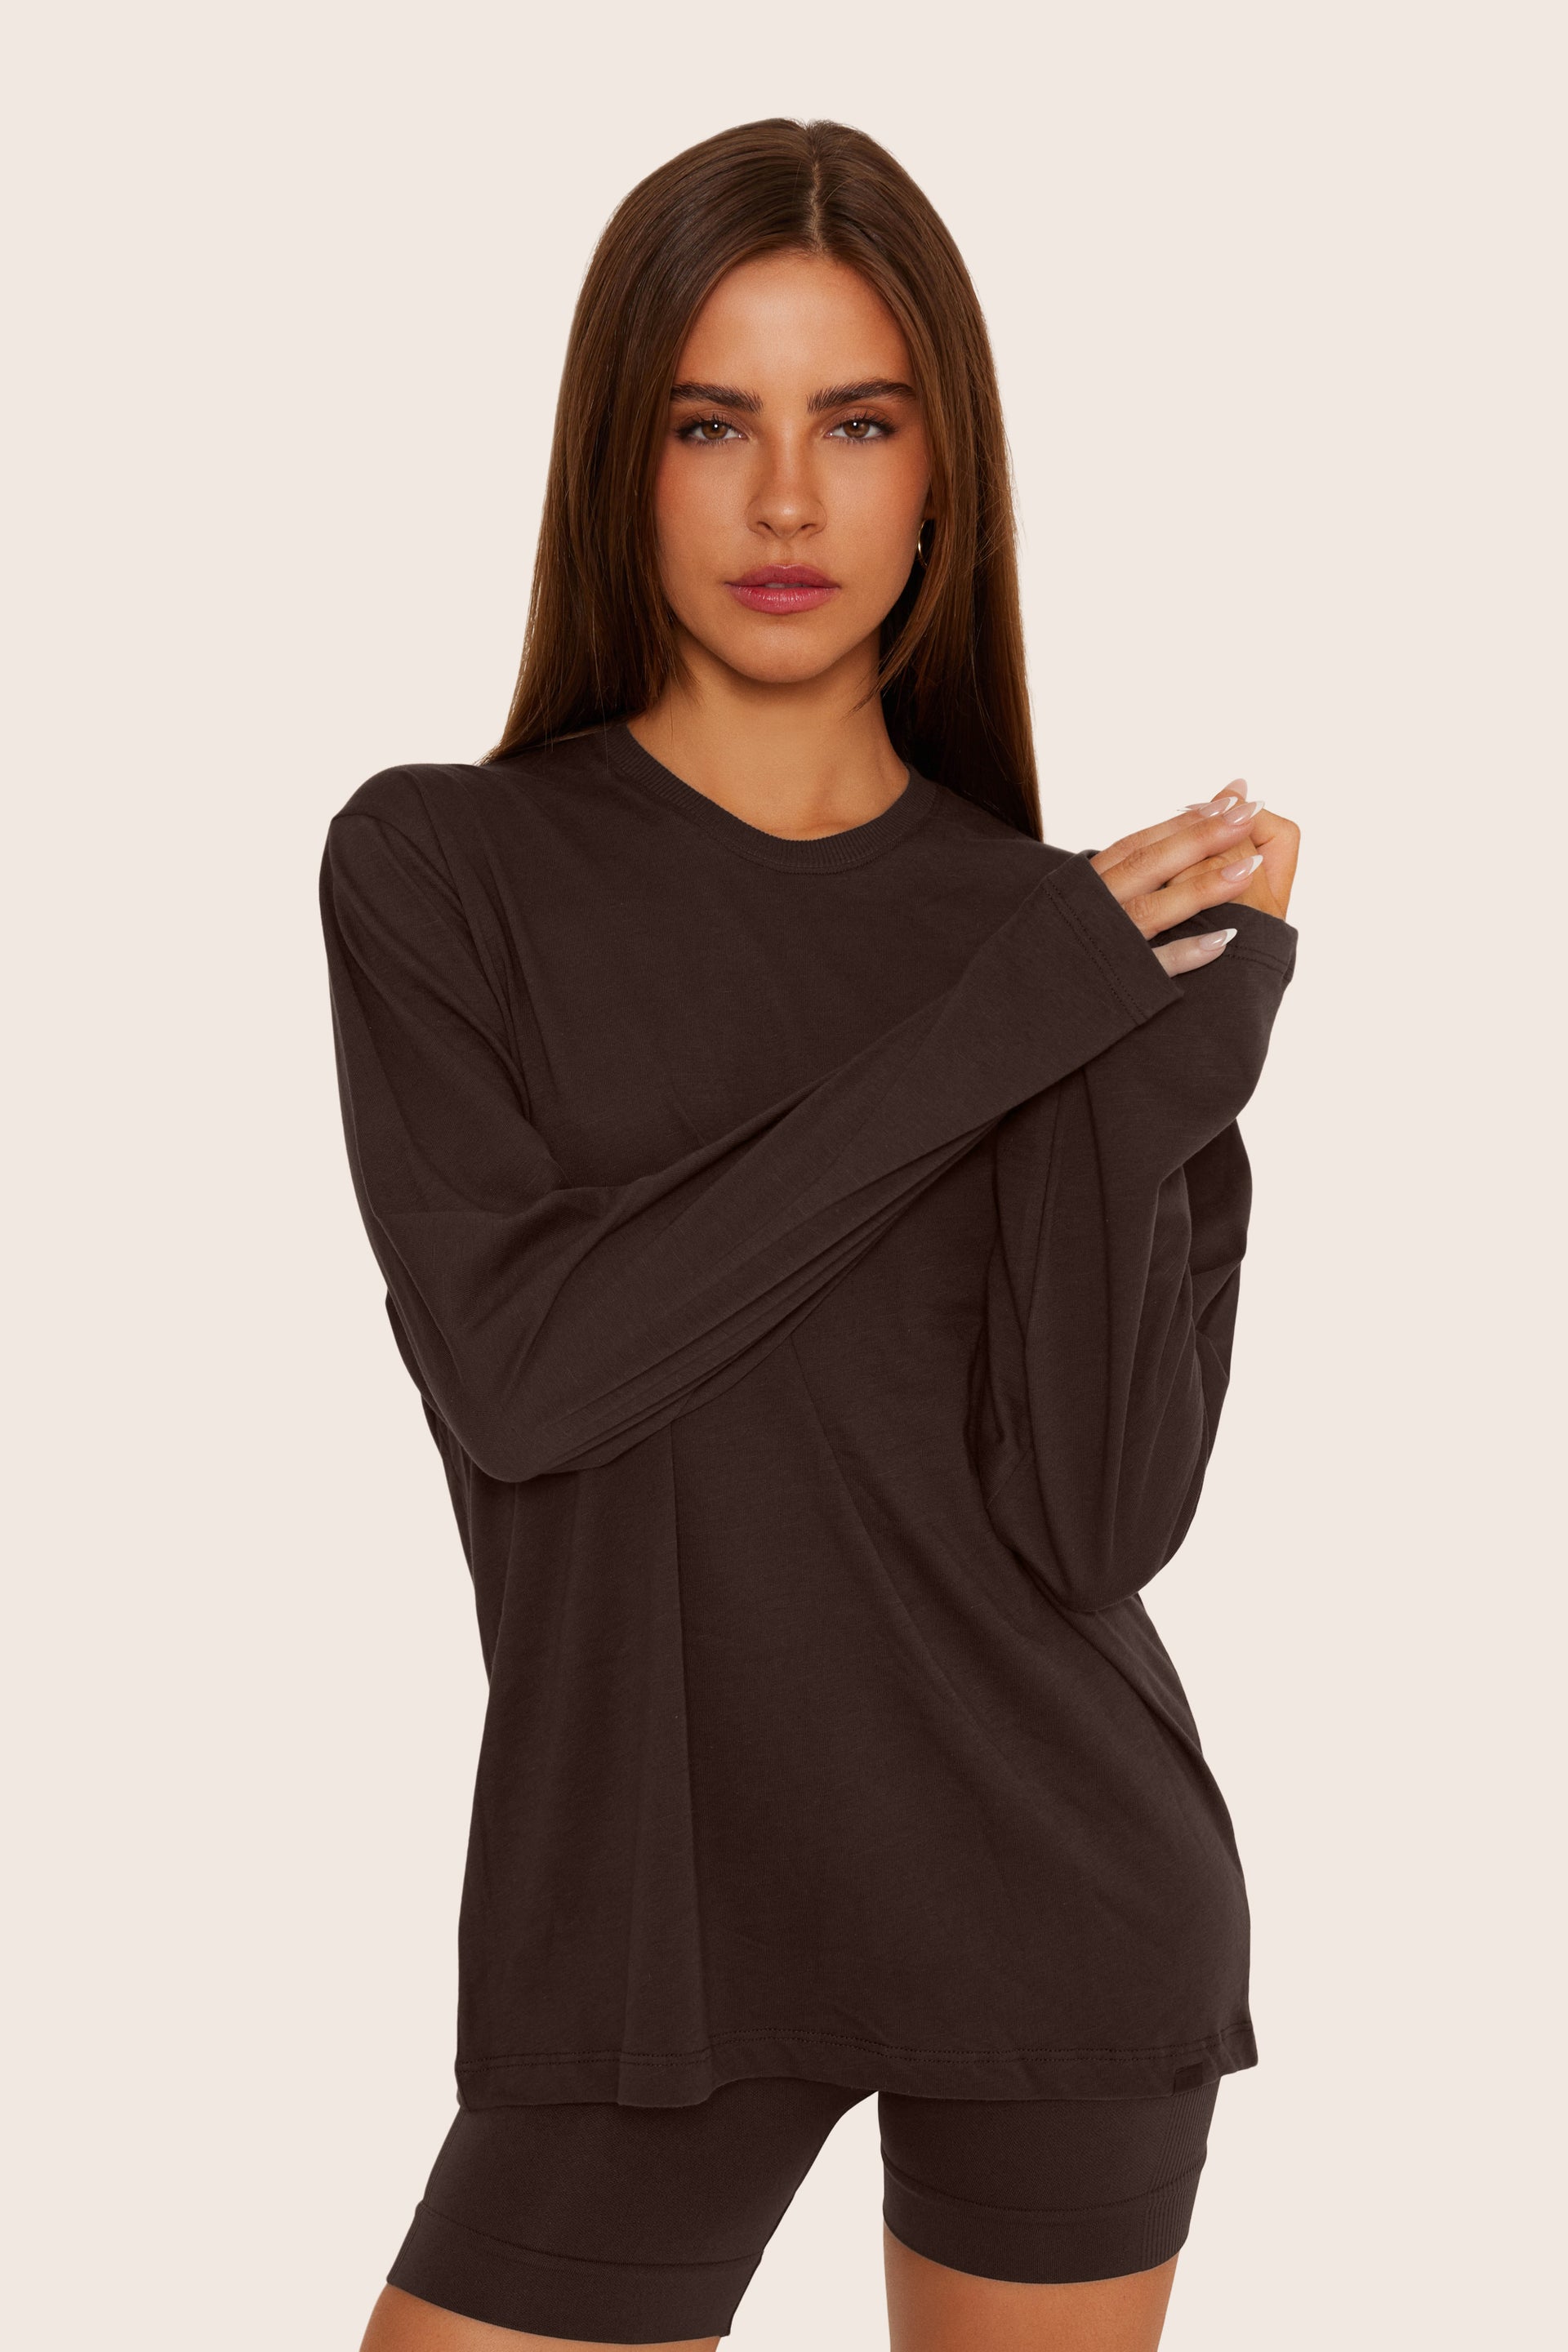 SET™ CLASSIC COTTON DAILY LONG SLEEVE IN ESPRESSO